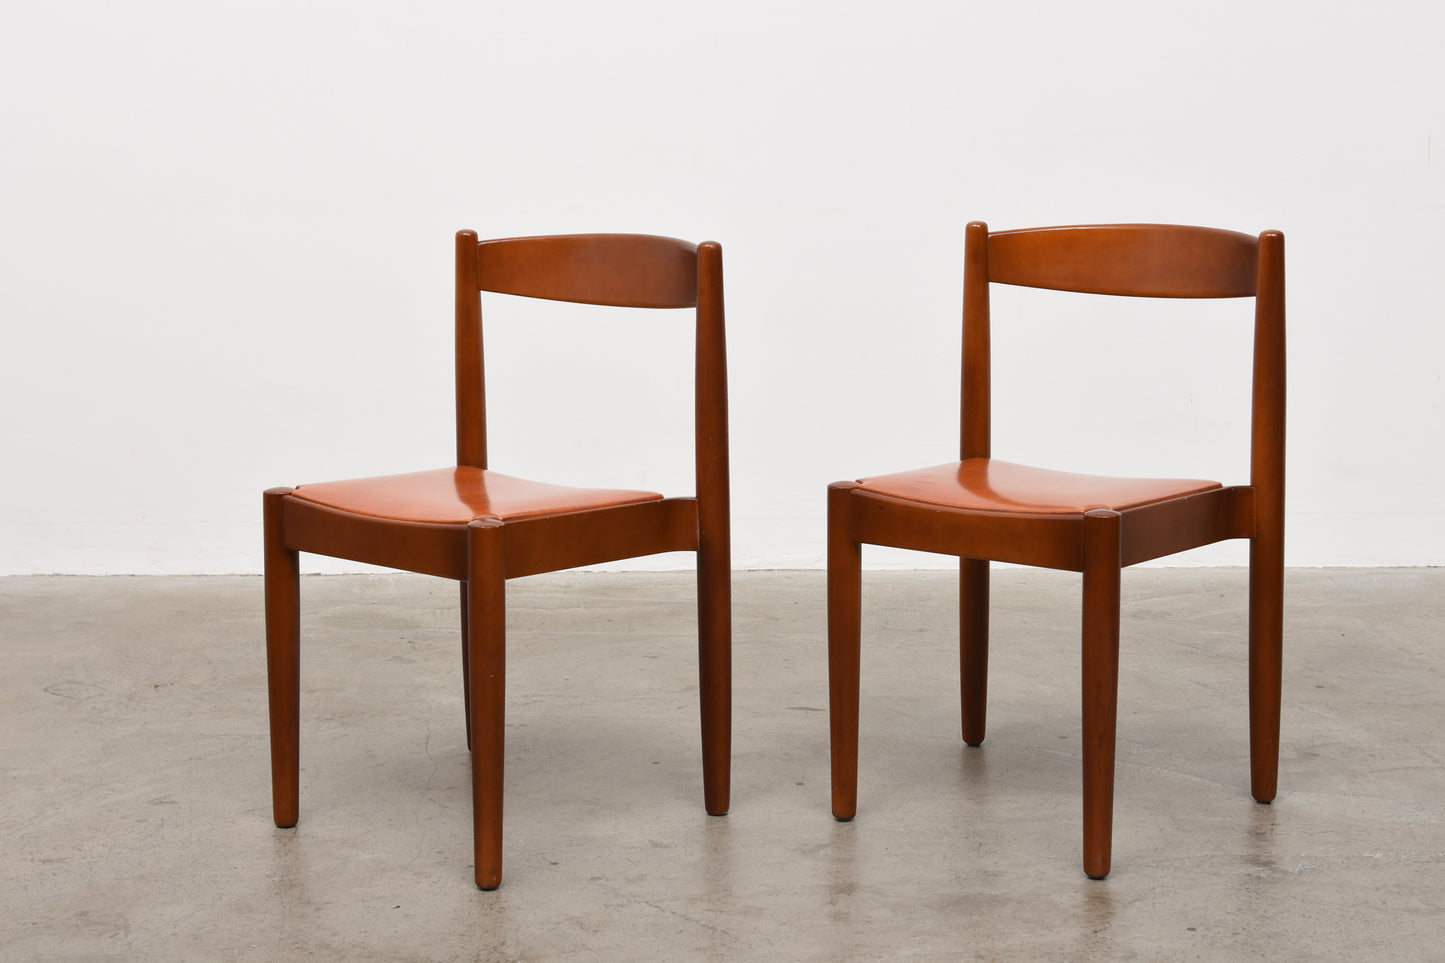 One available: Stacking chairs by E.K. Augustsson